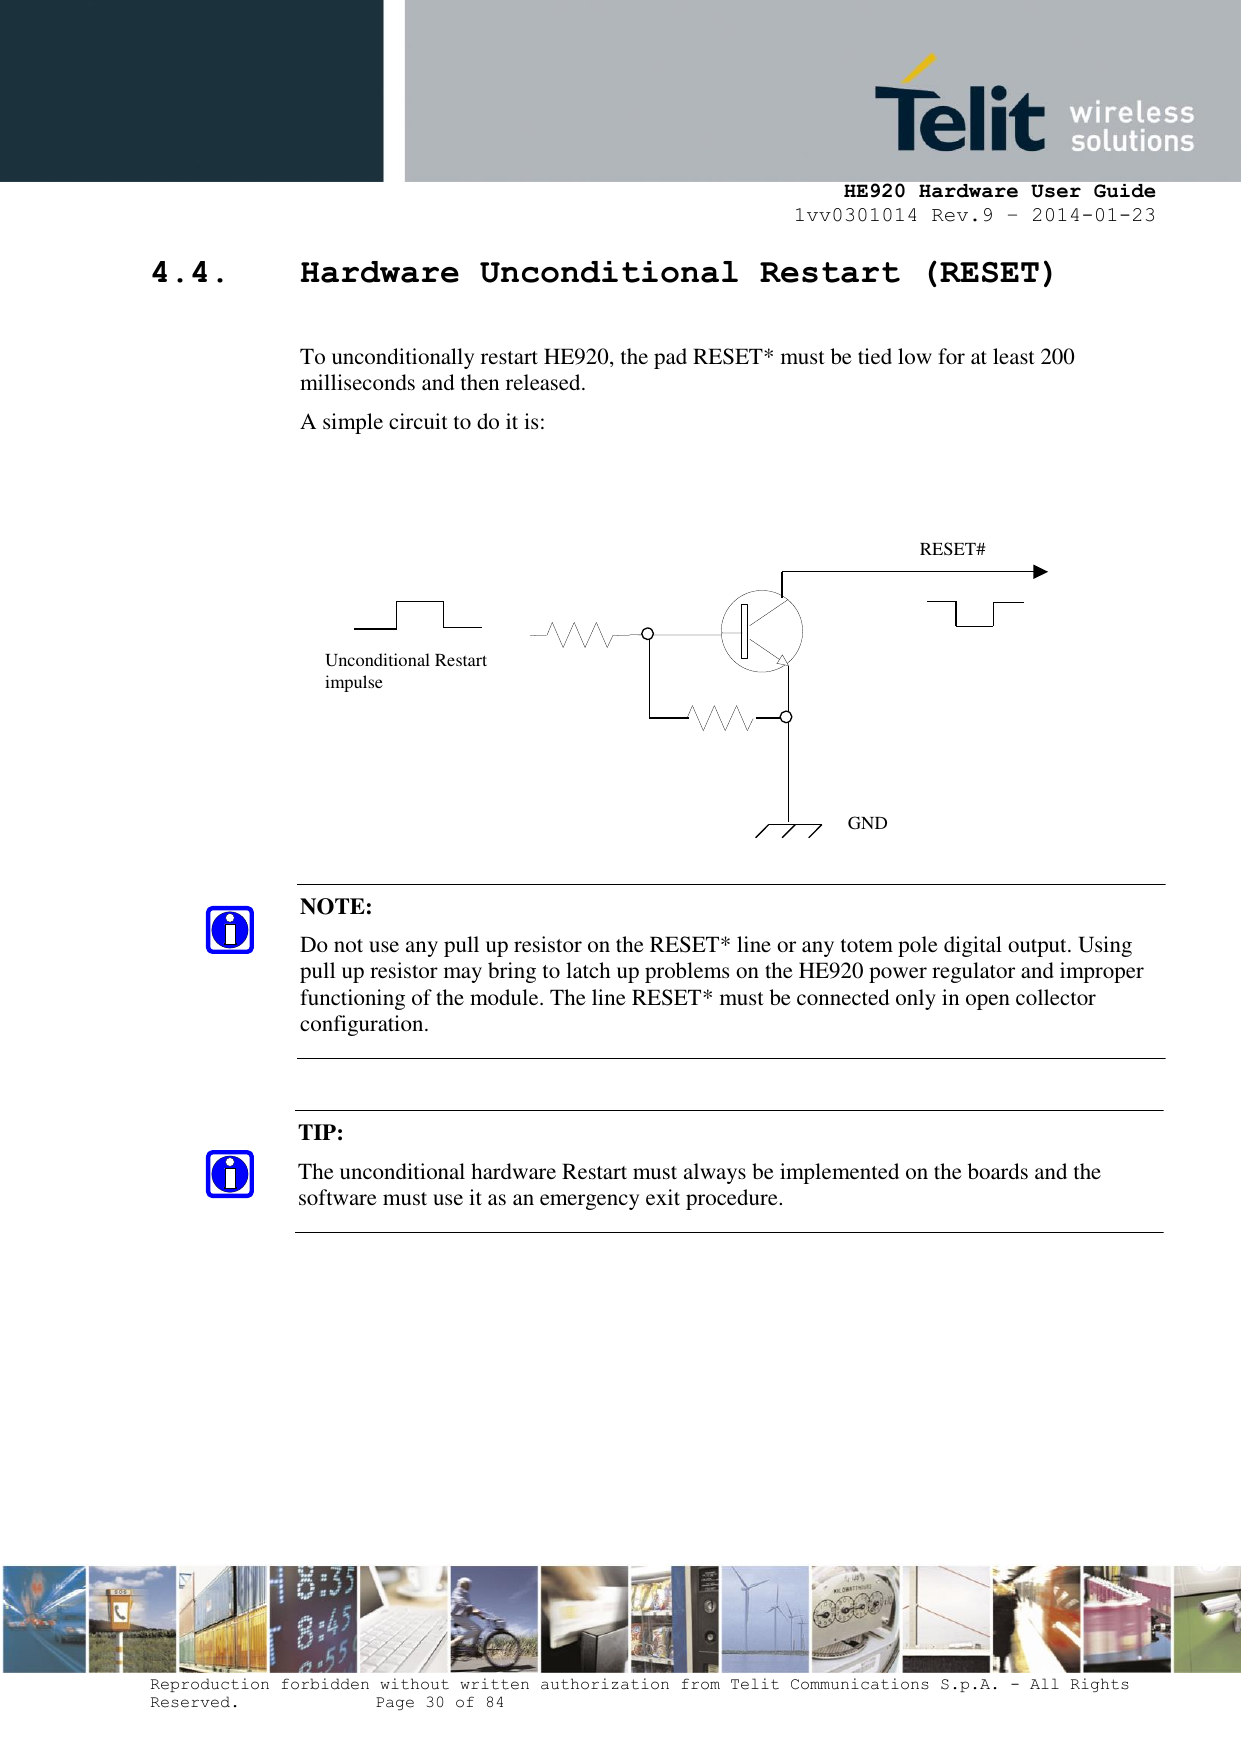     HE920 Hardware User Guide 1vv0301014 Rev.9 – 2014-01-23 Reproduction forbidden without written authorization from Telit Communications S.p.A. - All Rights Reserved.    Page 30 of 84  4.4. Hardware Unconditional Restart (RESET)  To unconditionally restart HE920, the pad RESET* must be tied low for at least 200 milliseconds and then released. A simple circuit to do it is:                      NOTE:  Do not use any pull up resistor on the RESET* line or any totem pole digital output. Using pull up resistor may bring to latch up problems on the HE920 power regulator and improper functioning of the module. The line RESET* must be connected only in open collector configuration. TIP:  The unconditional hardware Restart must always be implemented on the boards and the software must use it as an emergency exit procedure.    RESET# Unconditional Restart impulse   GND 